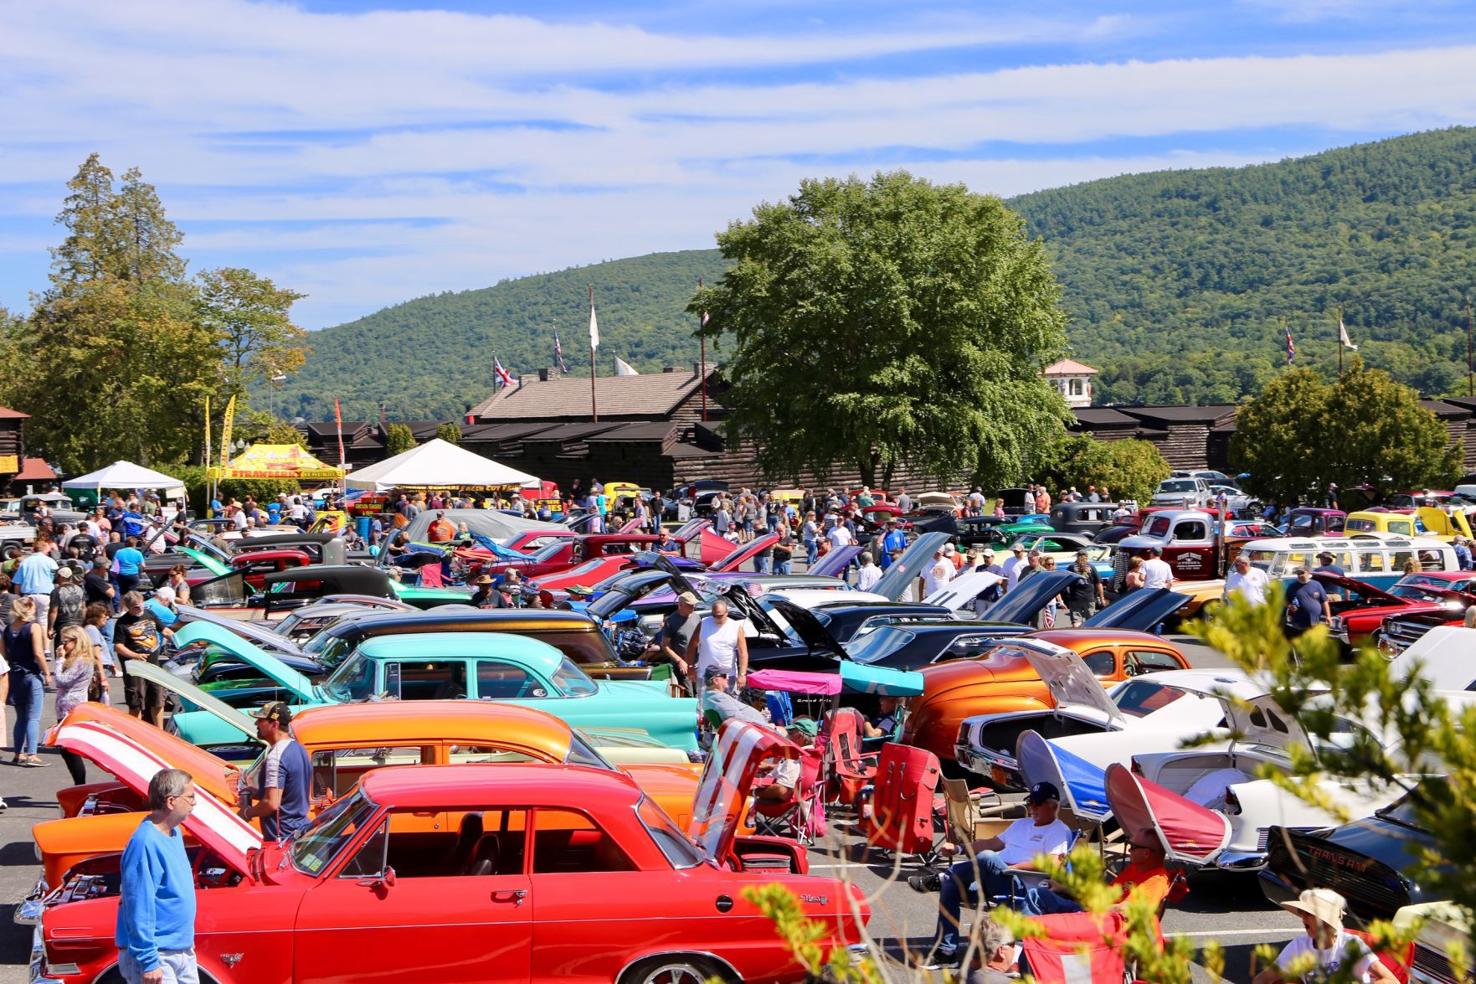 From the mechanics to the paint job, car enthusiasts see it all at Lake